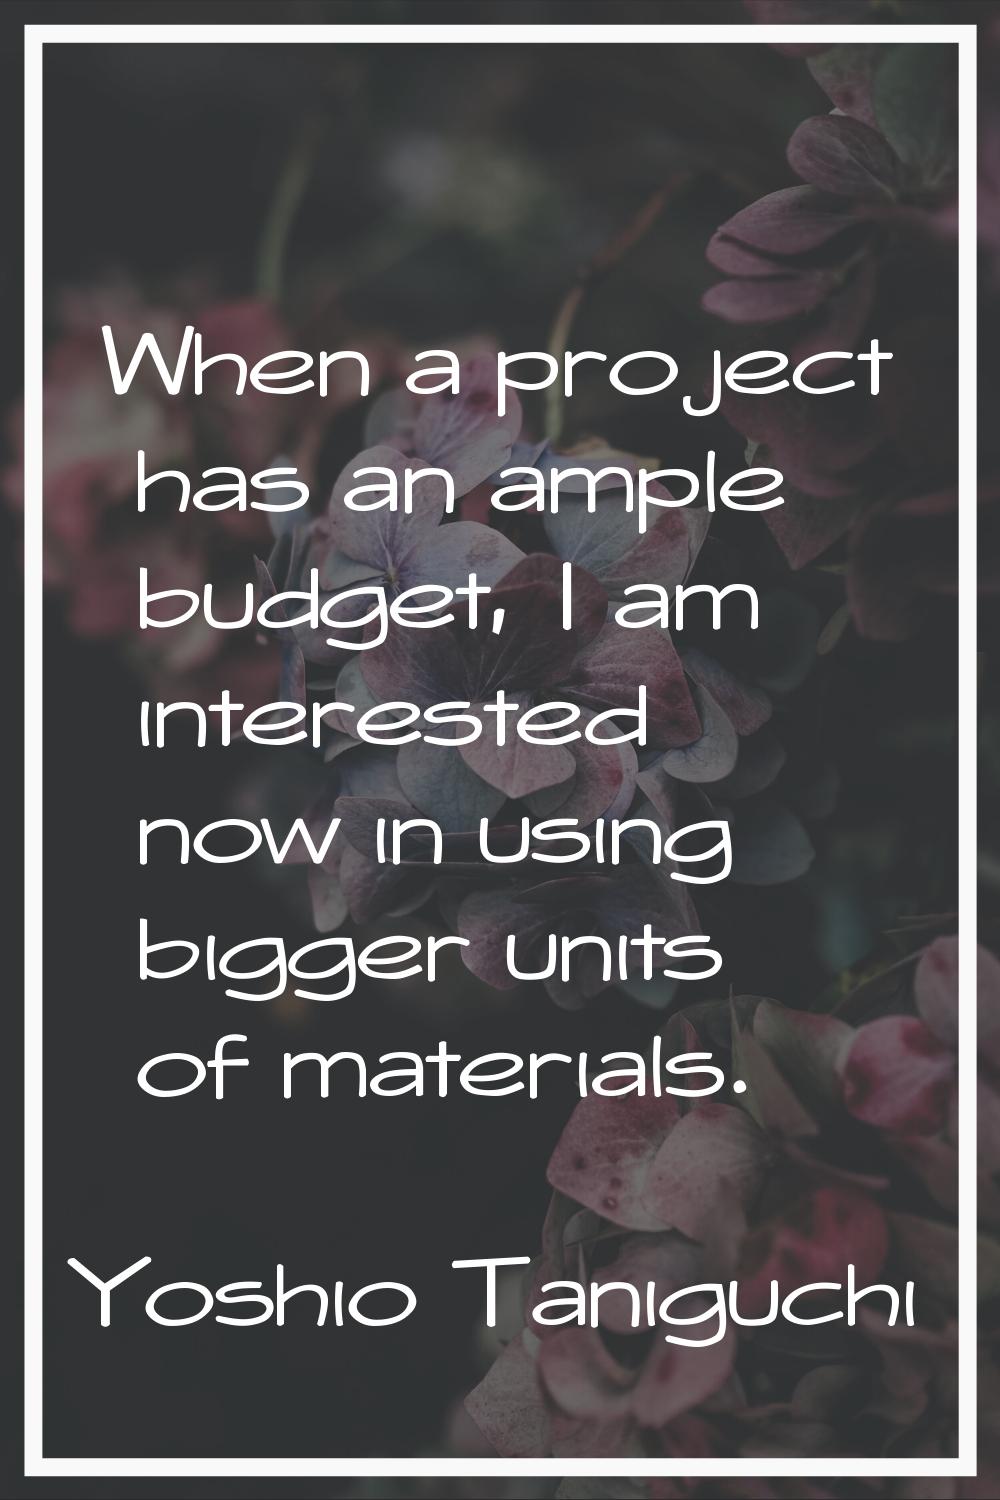 When a project has an ample budget, I am interested now in using bigger units of materials.